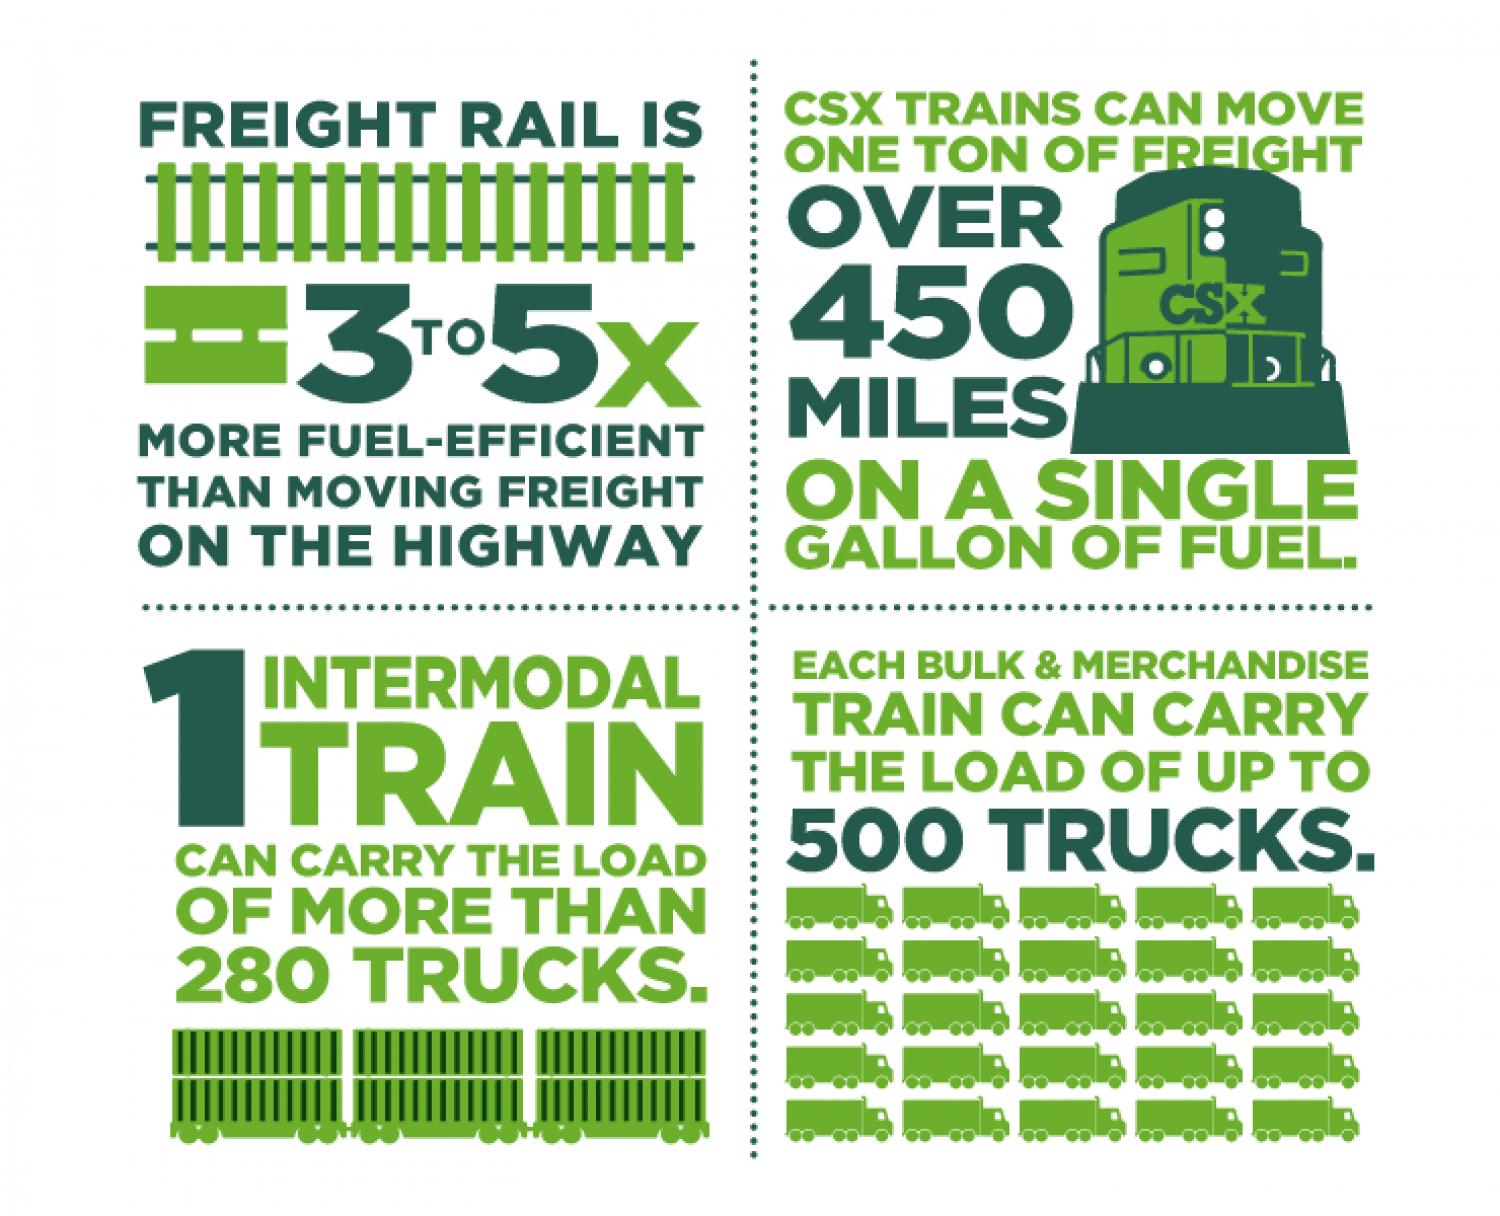 The Environmental Benefits of Freight Rail Infographic